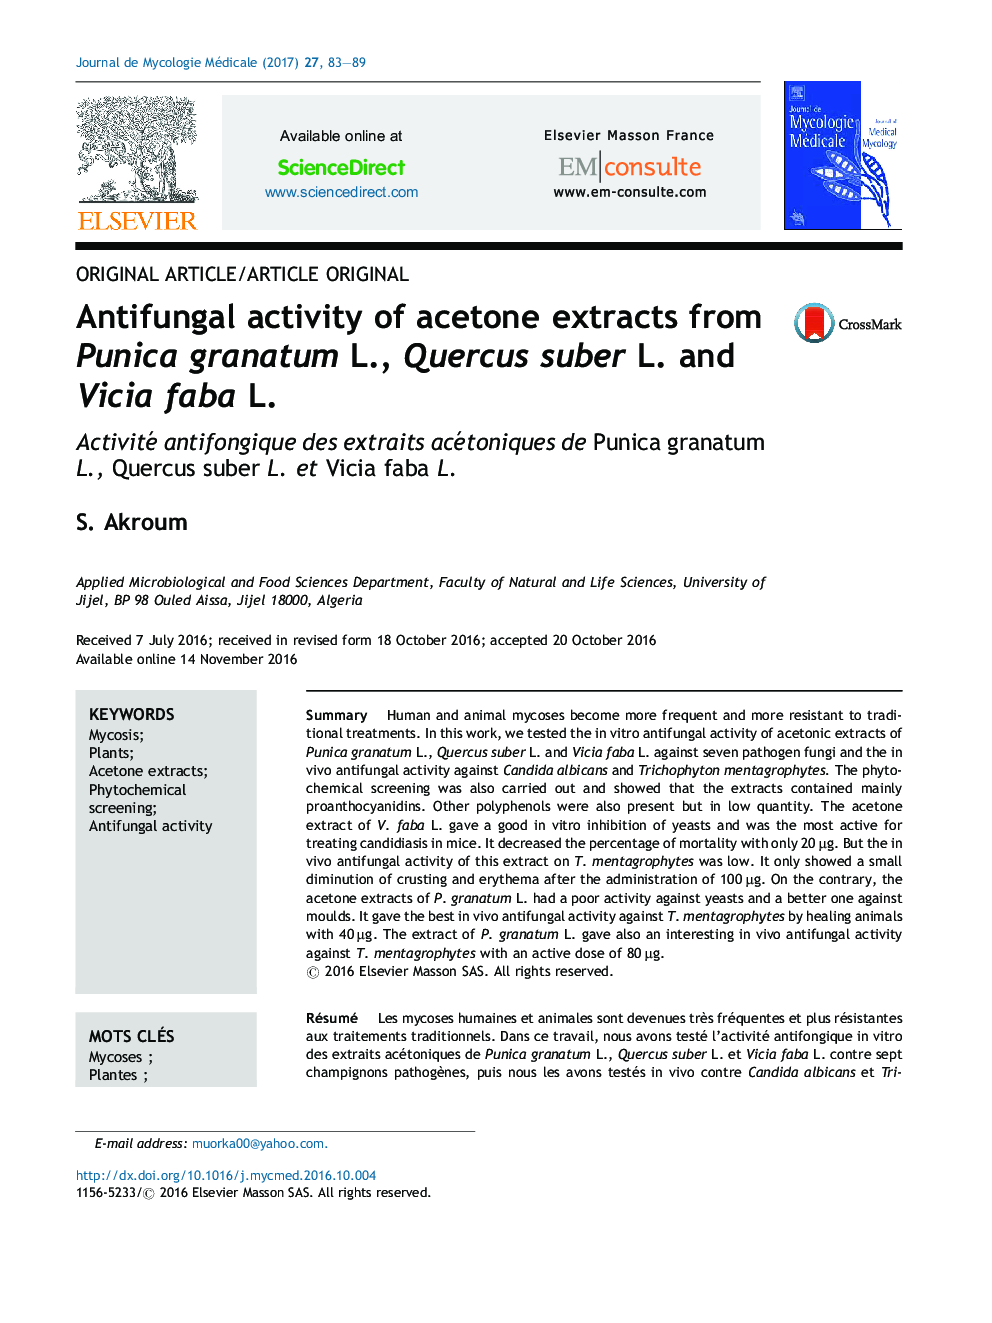 Antifungal activity of acetone extracts from Punica granatum L., Quercus suber L.Â and Vicia faba L.